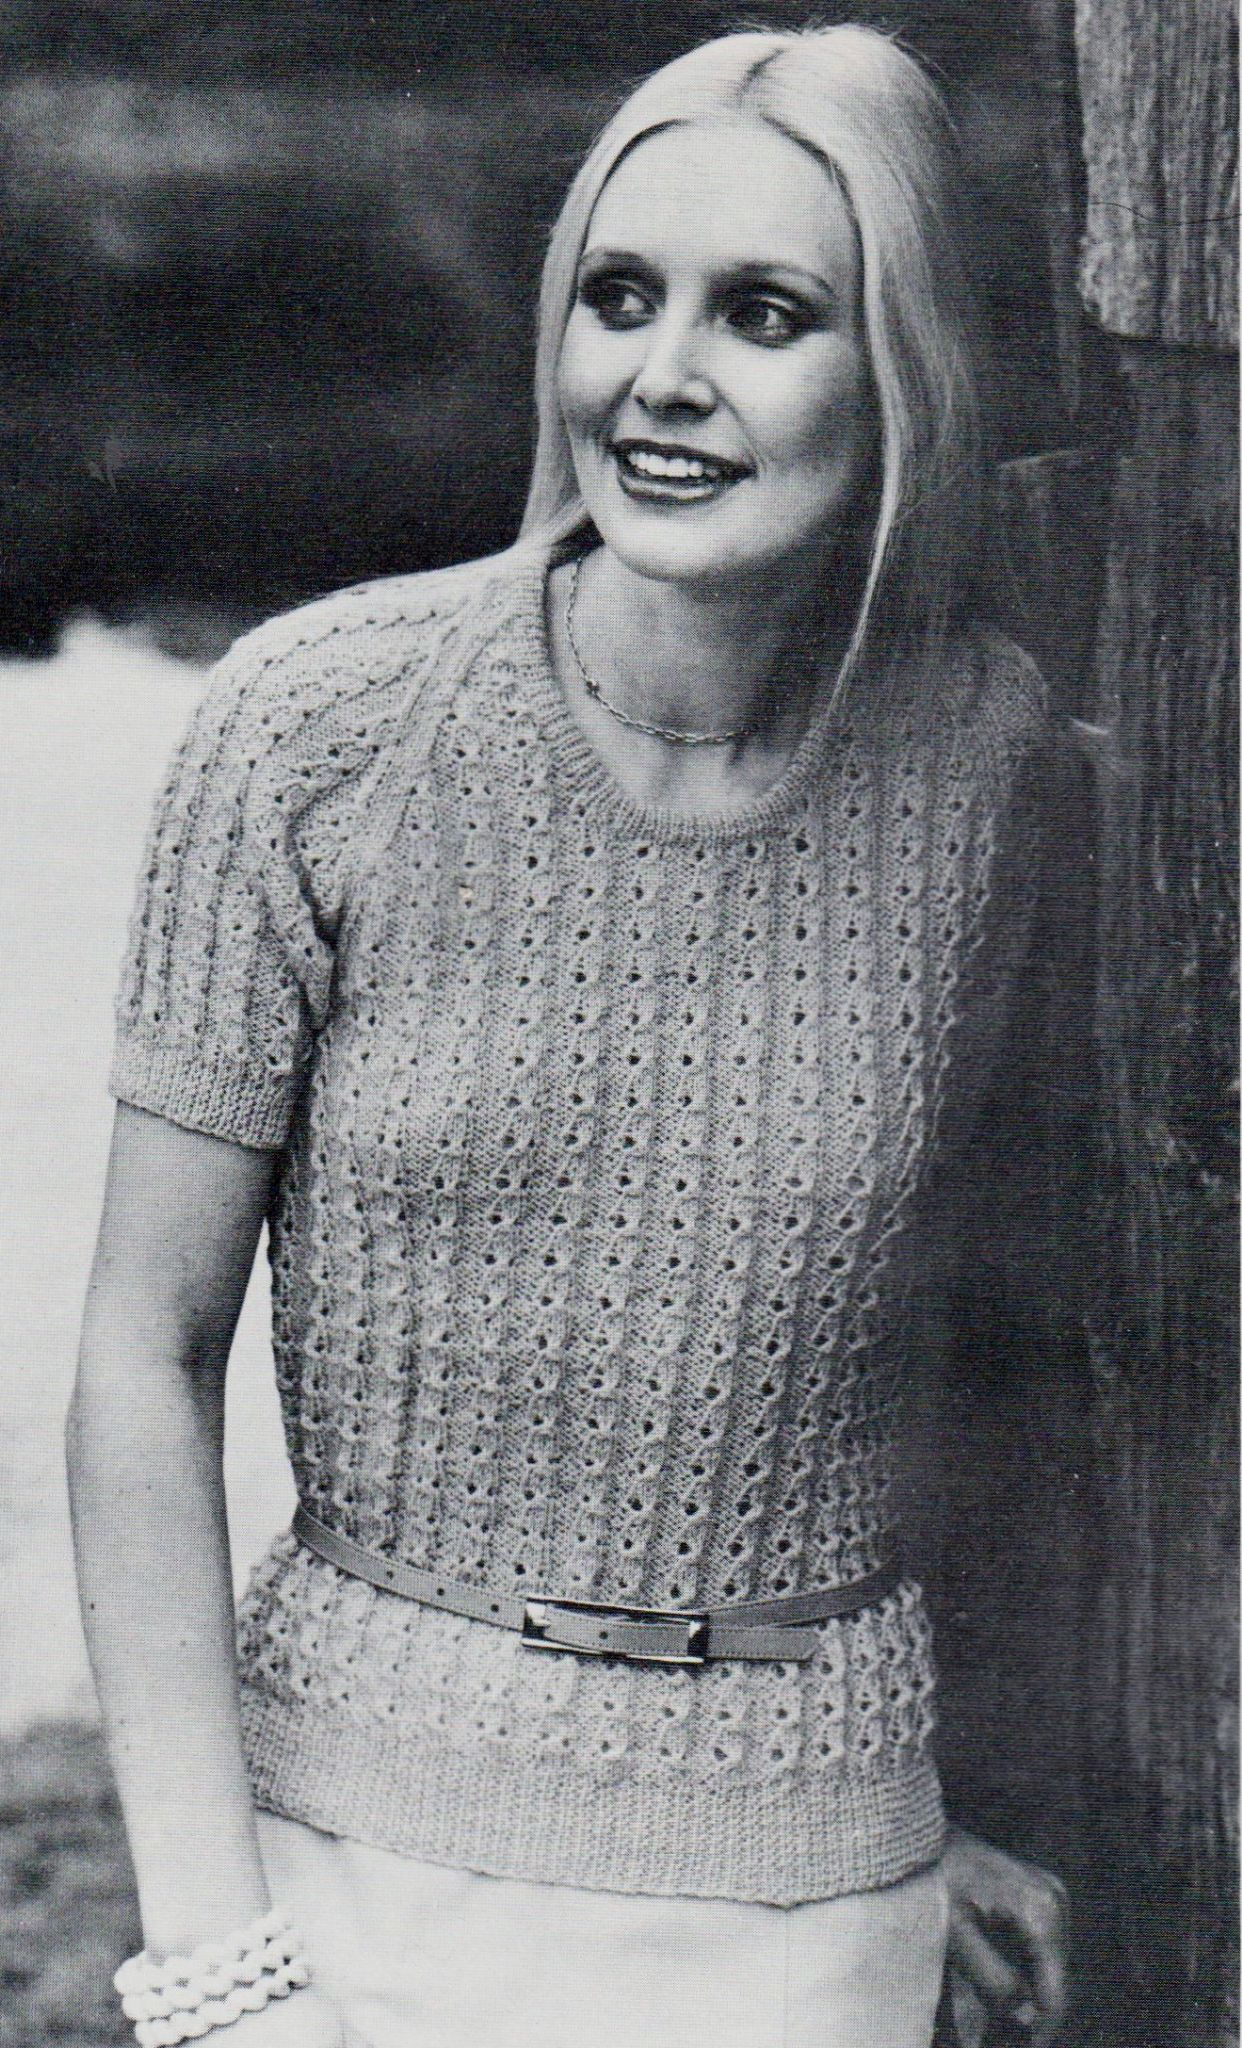 Patterns To Knit Pdf Digital Download Vintage Knitting Pattern To Make A Ladies Short Sleeve Sweater In Openwork Rib Easy To Knit In 4 Ply Bust 32 40